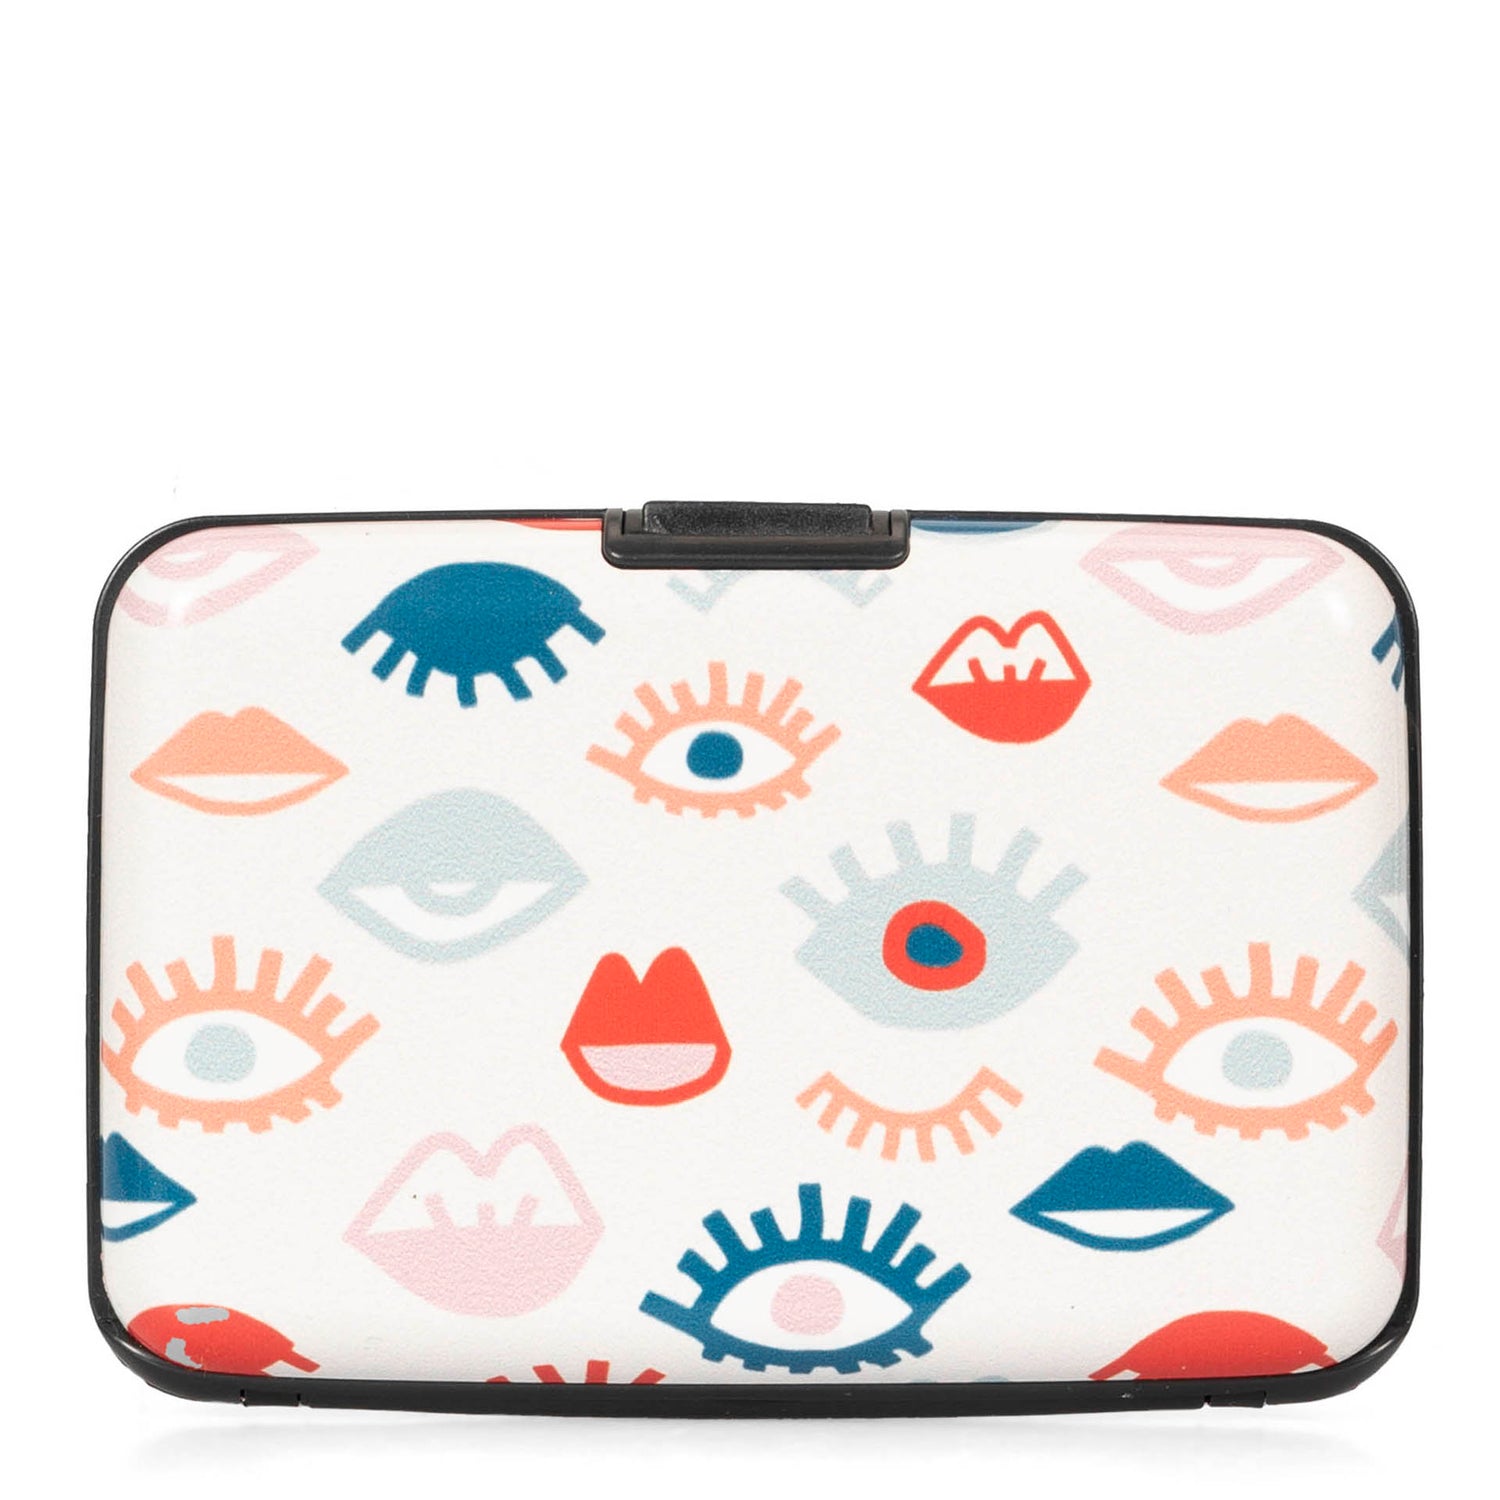 Front side of an aluminum card holder in a print of eye lashes and lips with white background showcasing its clasp.